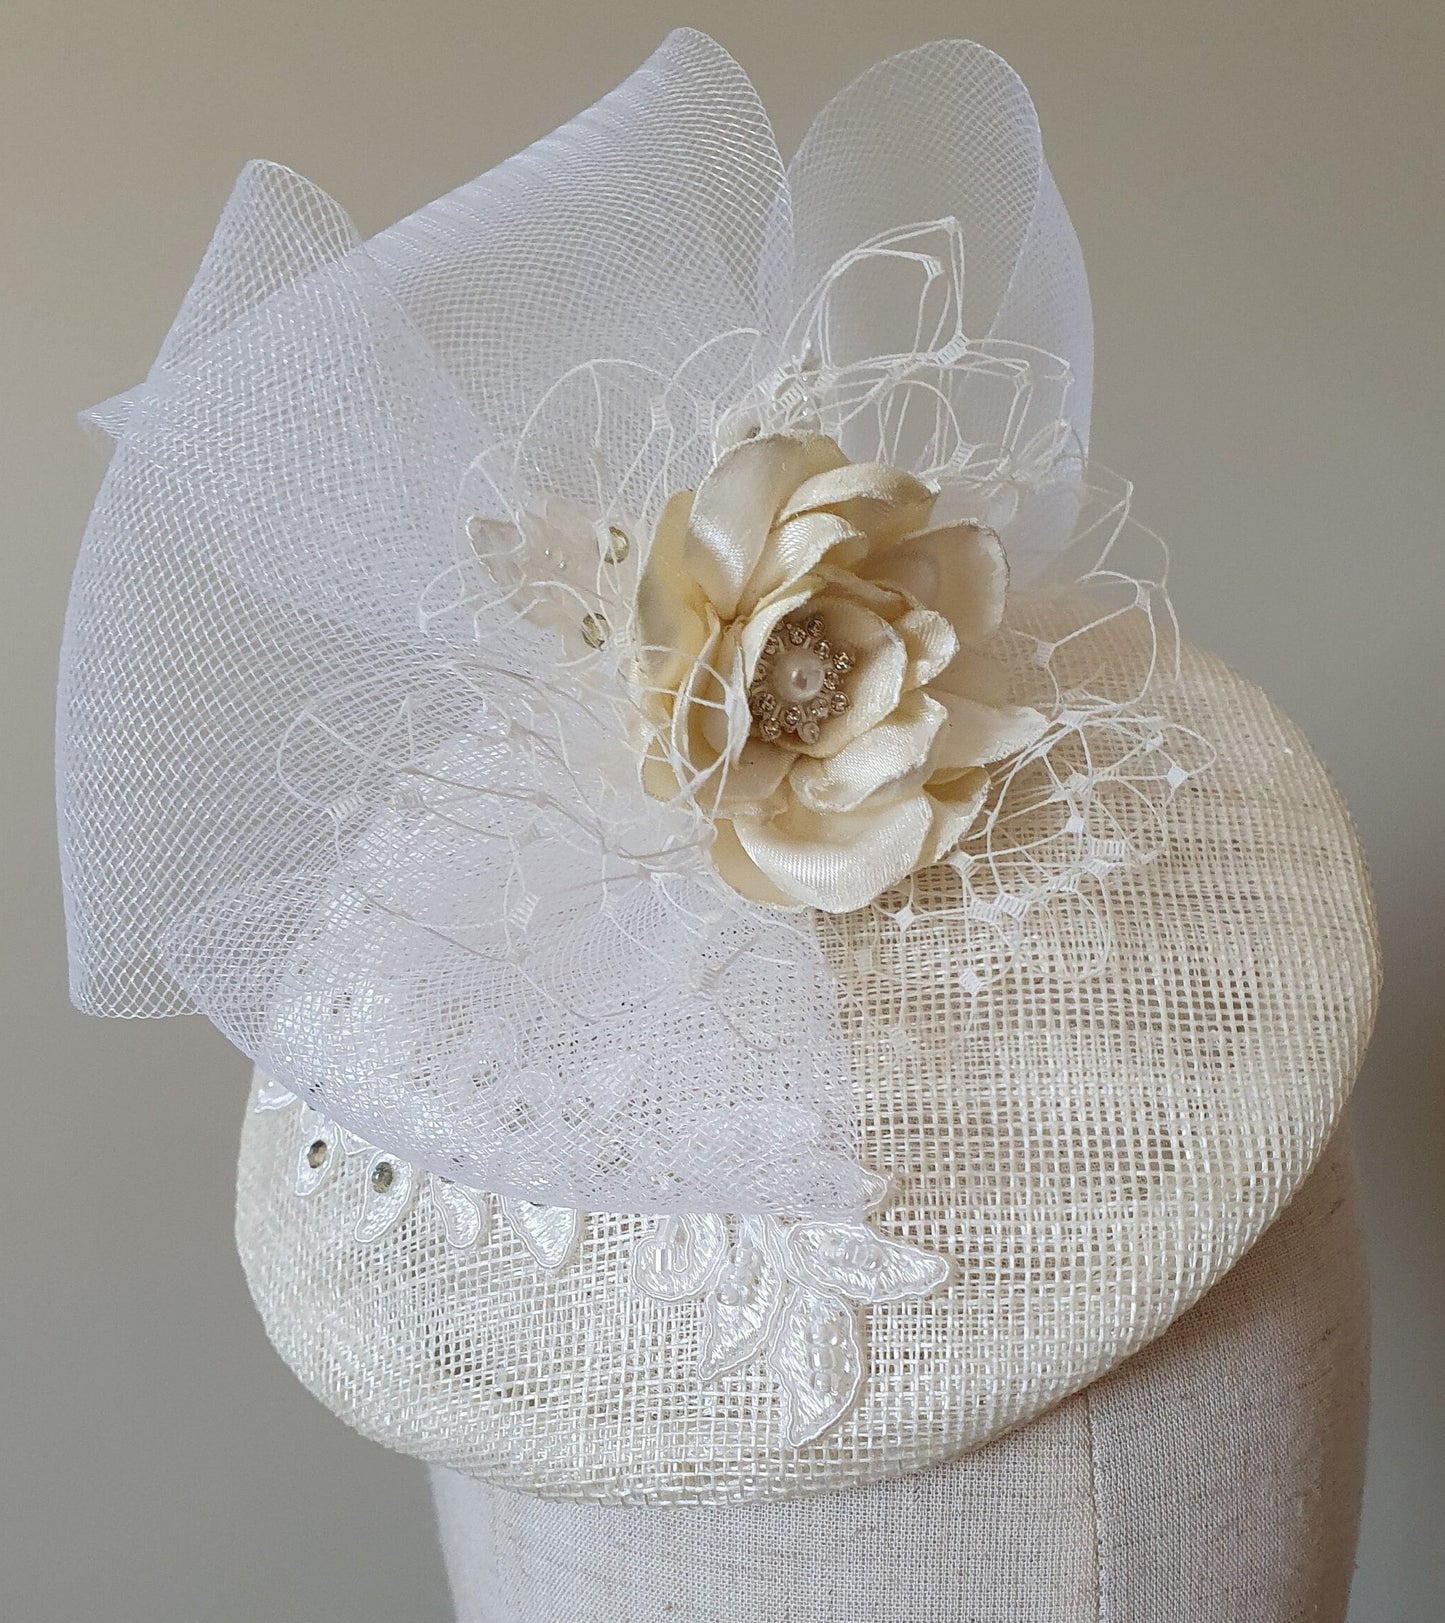 Fascinator handmade in ivory sinamay with white, bridal headdress - Perfect for weddings and festive occasions